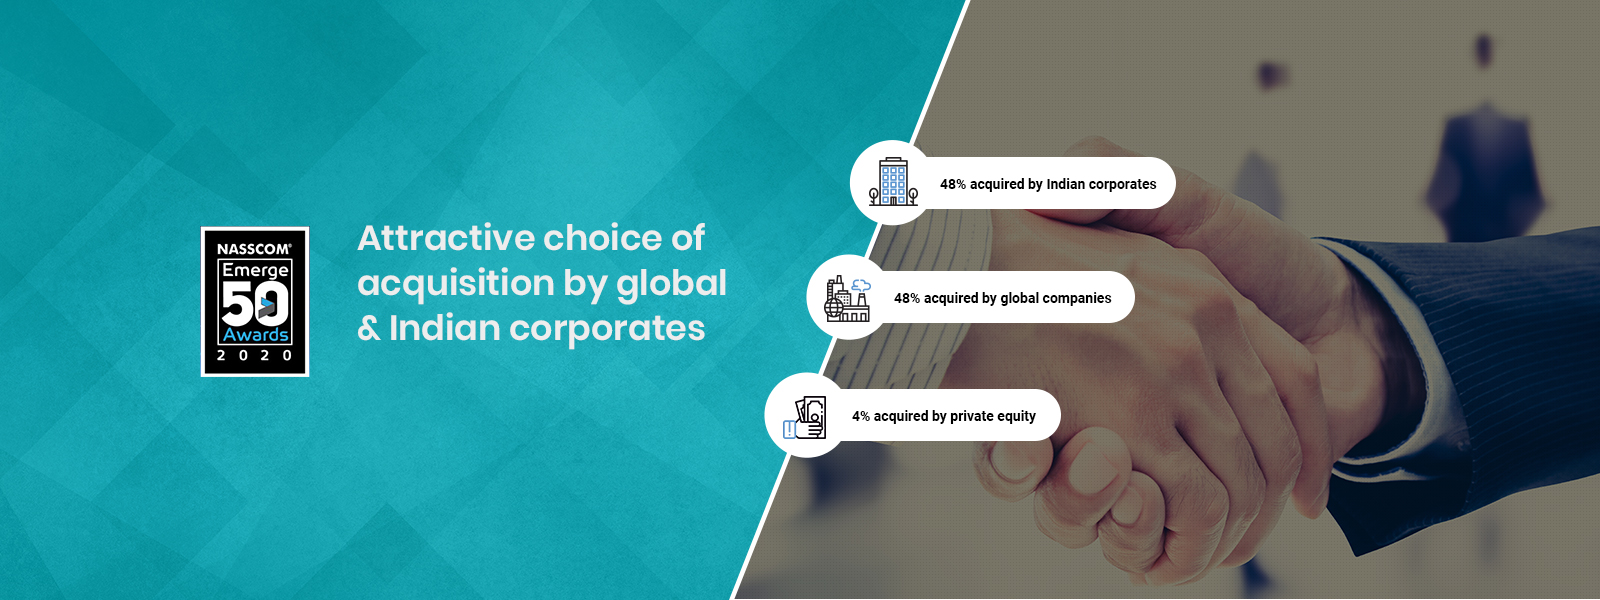 attractive choice of acquisition by global & Indian corporates